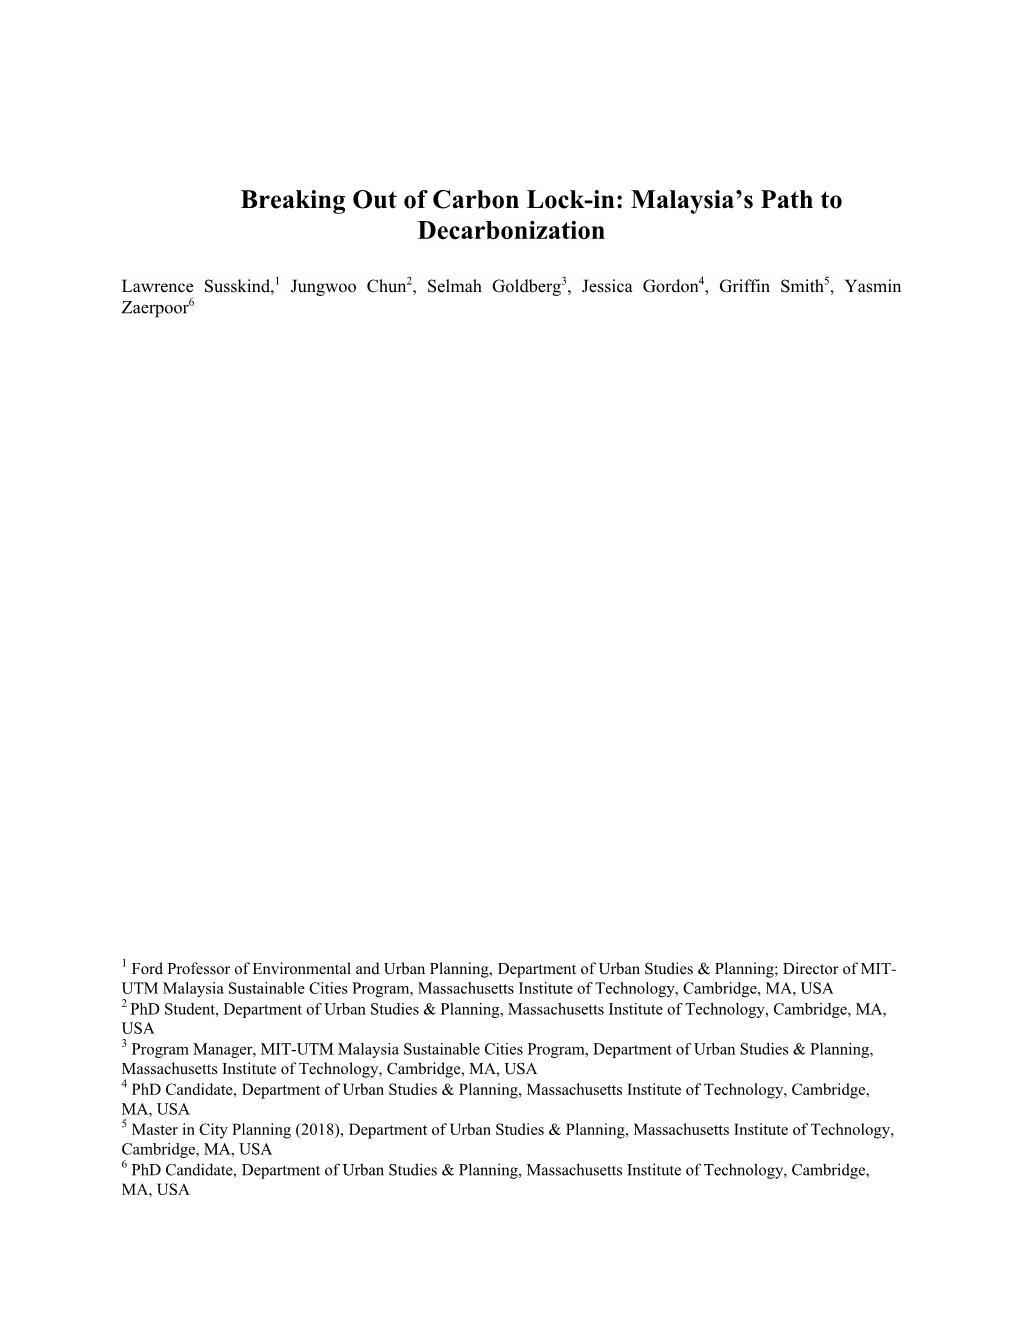 Malaysia's Path to Decarbonization